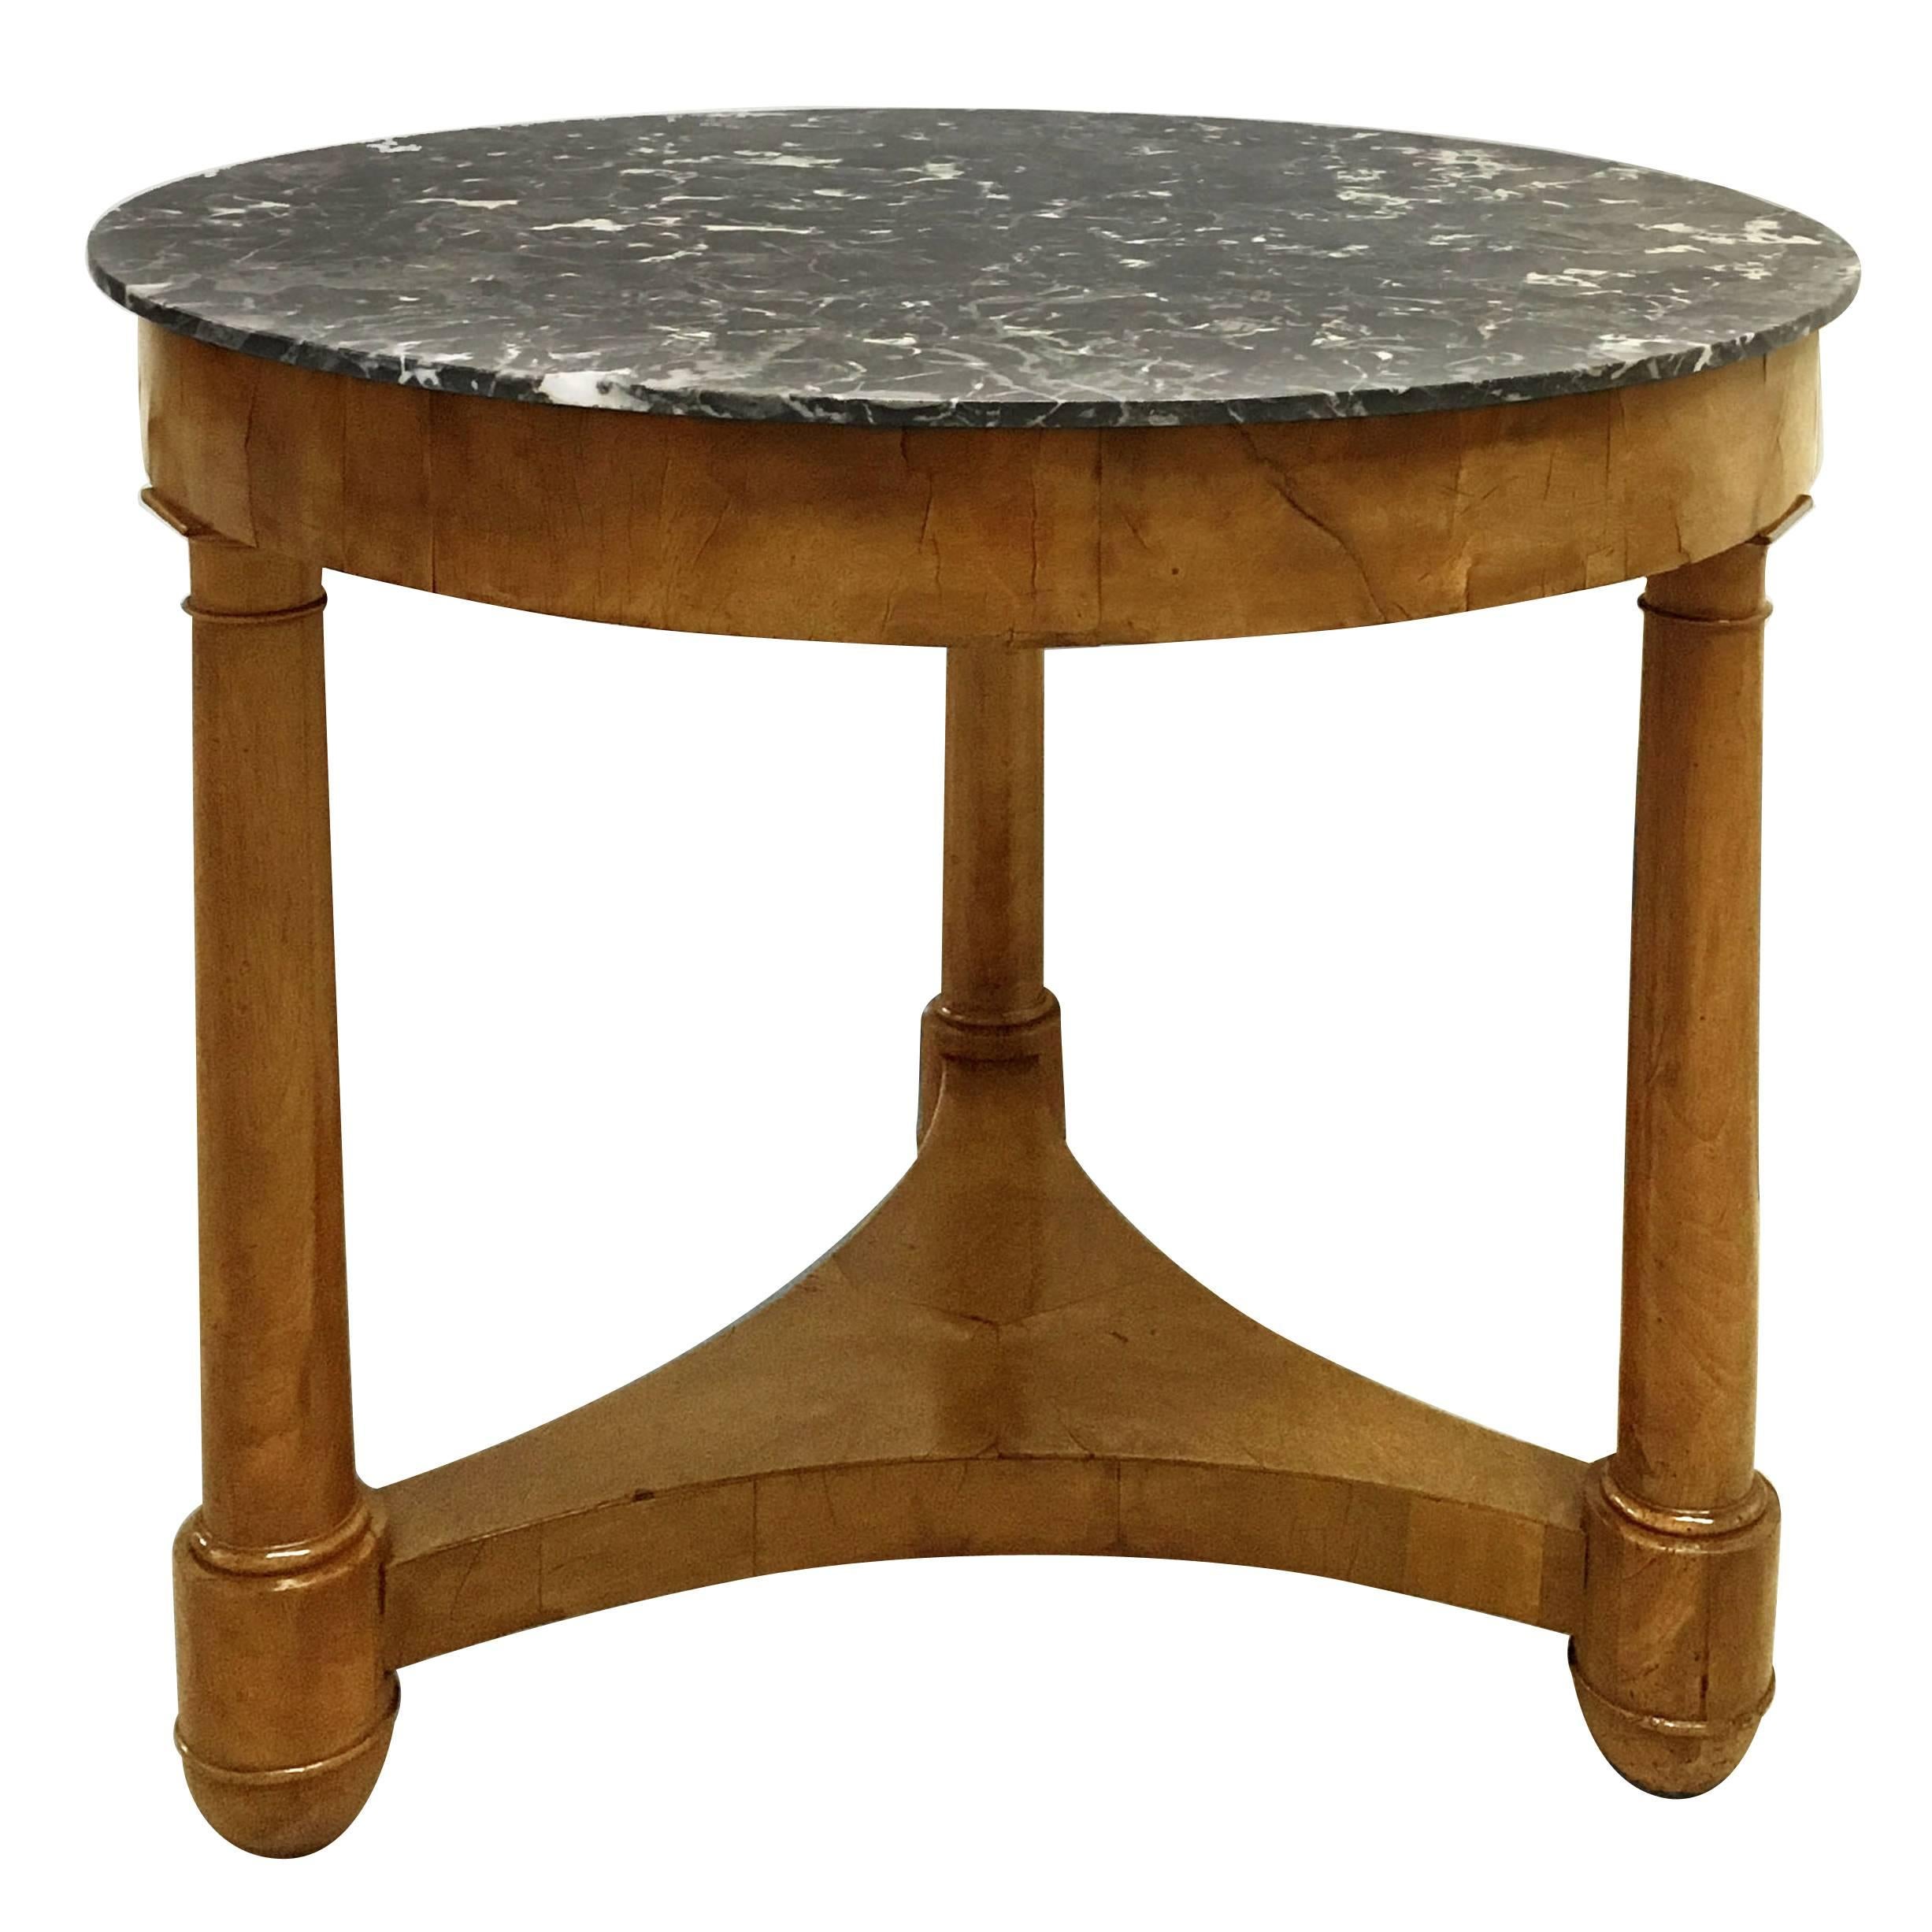  19th Century Louis Philippe Elmwood Round Table with Marble Top